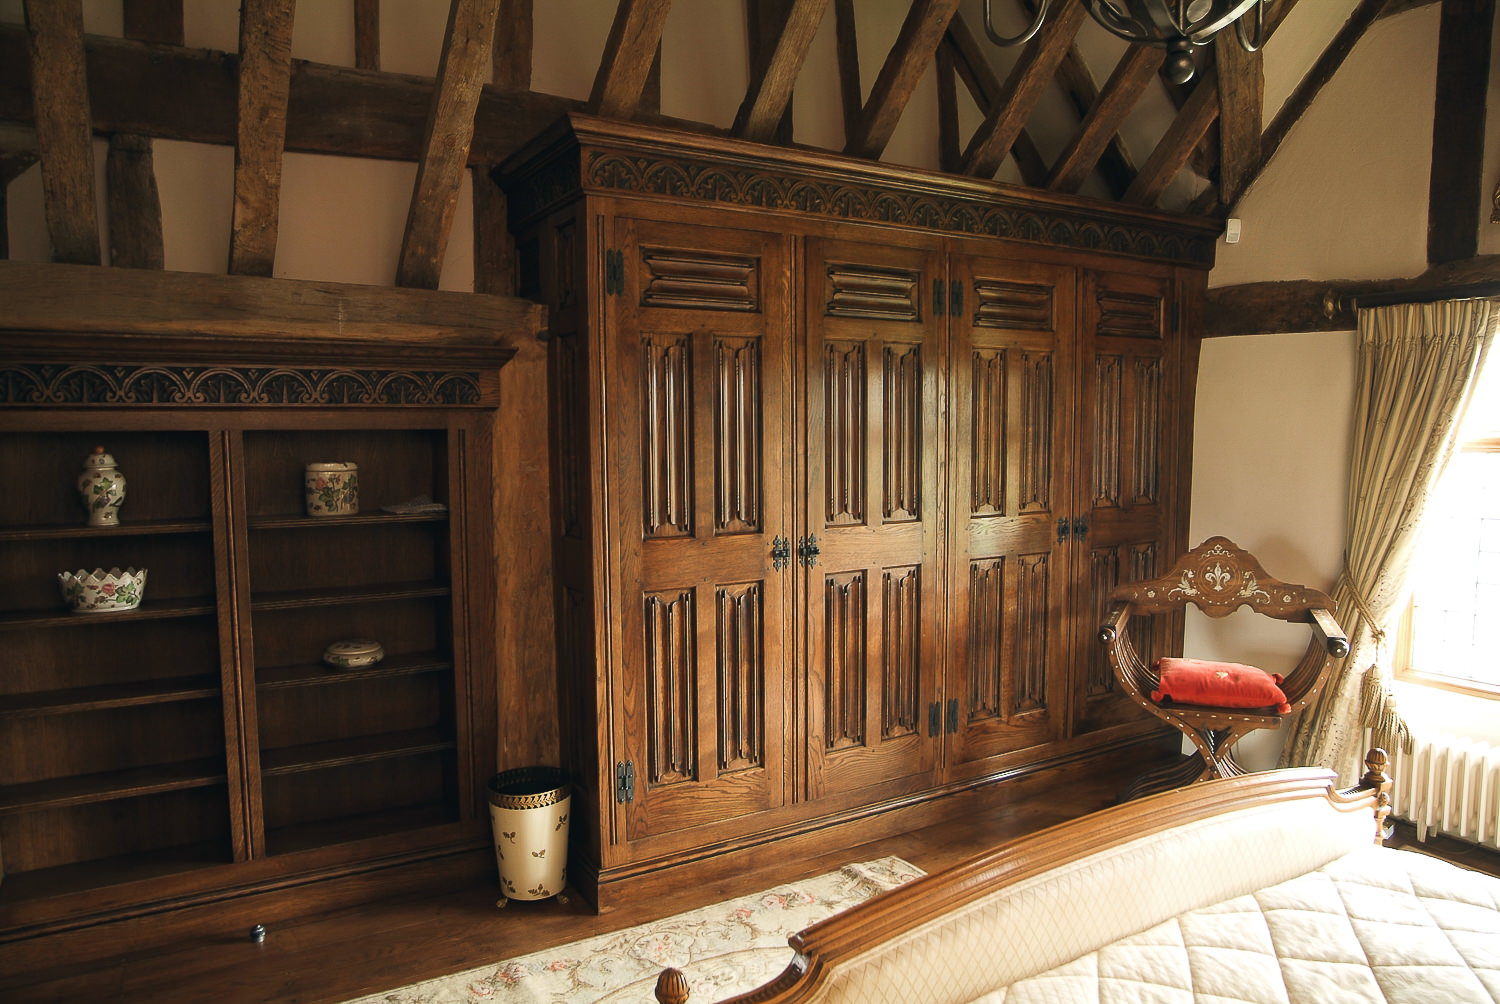 Gothic style fitted furniture